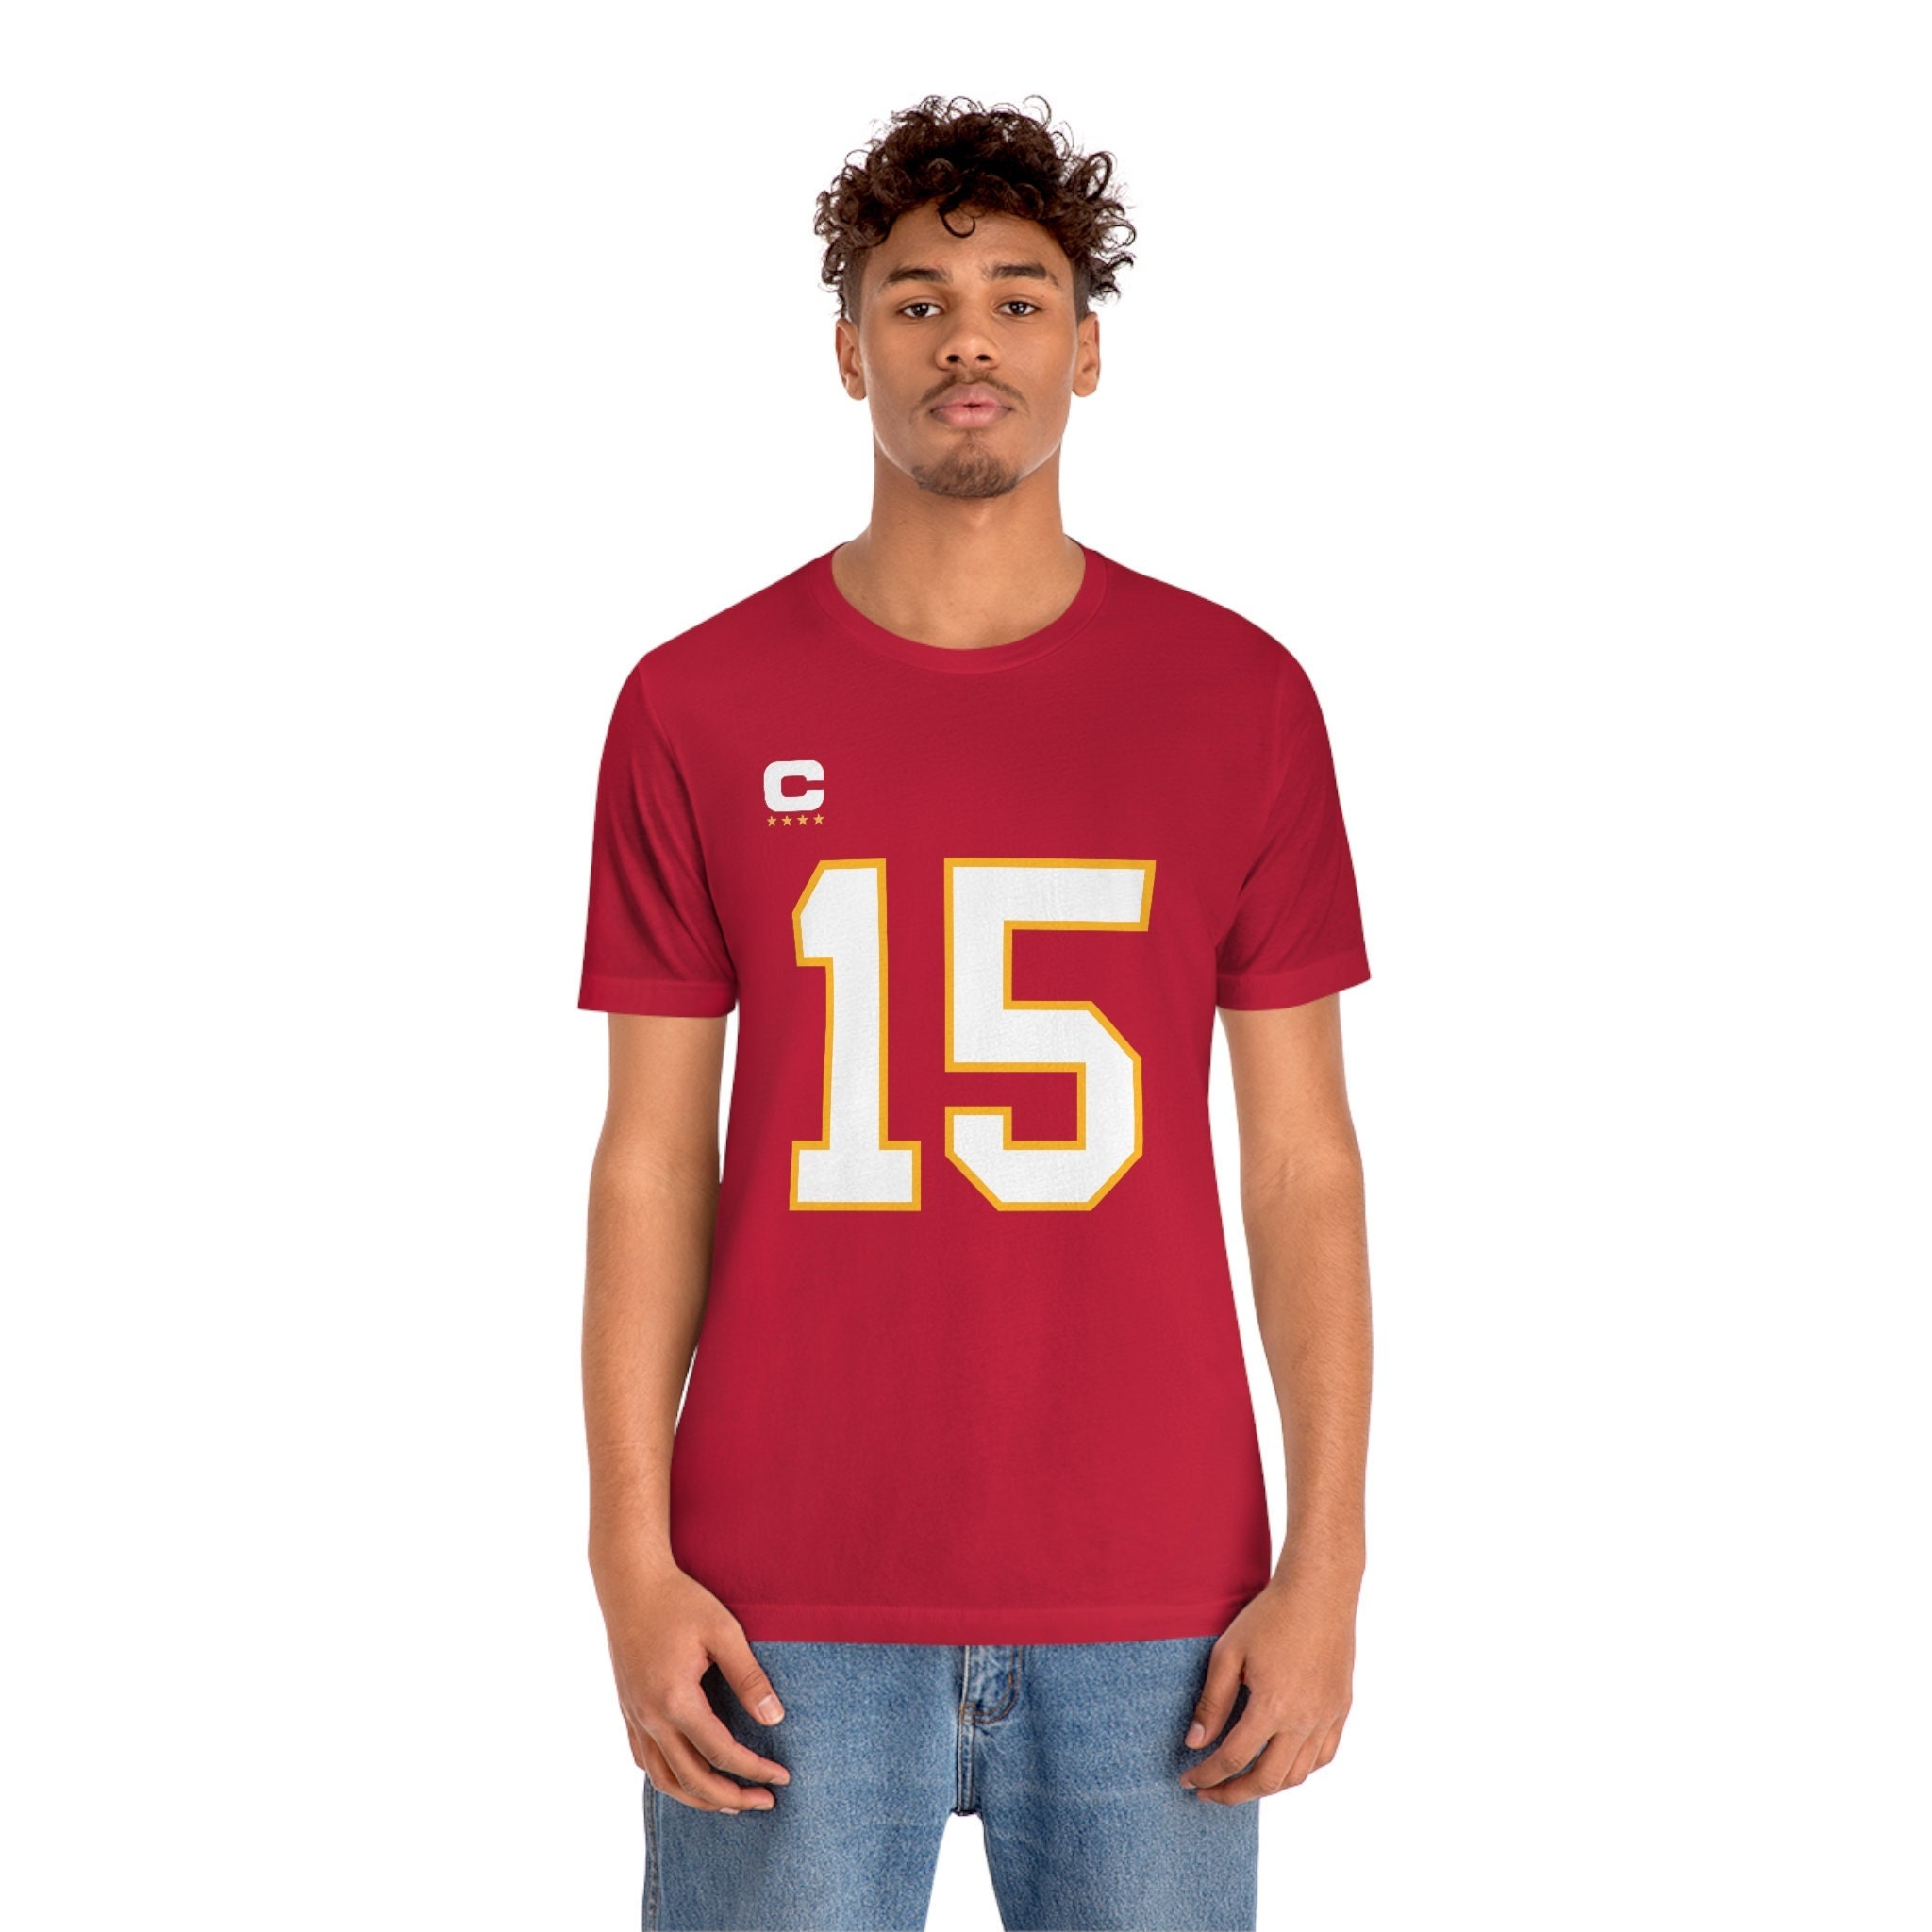 Discover T-shirt - Patrick Mahomes Jersey style